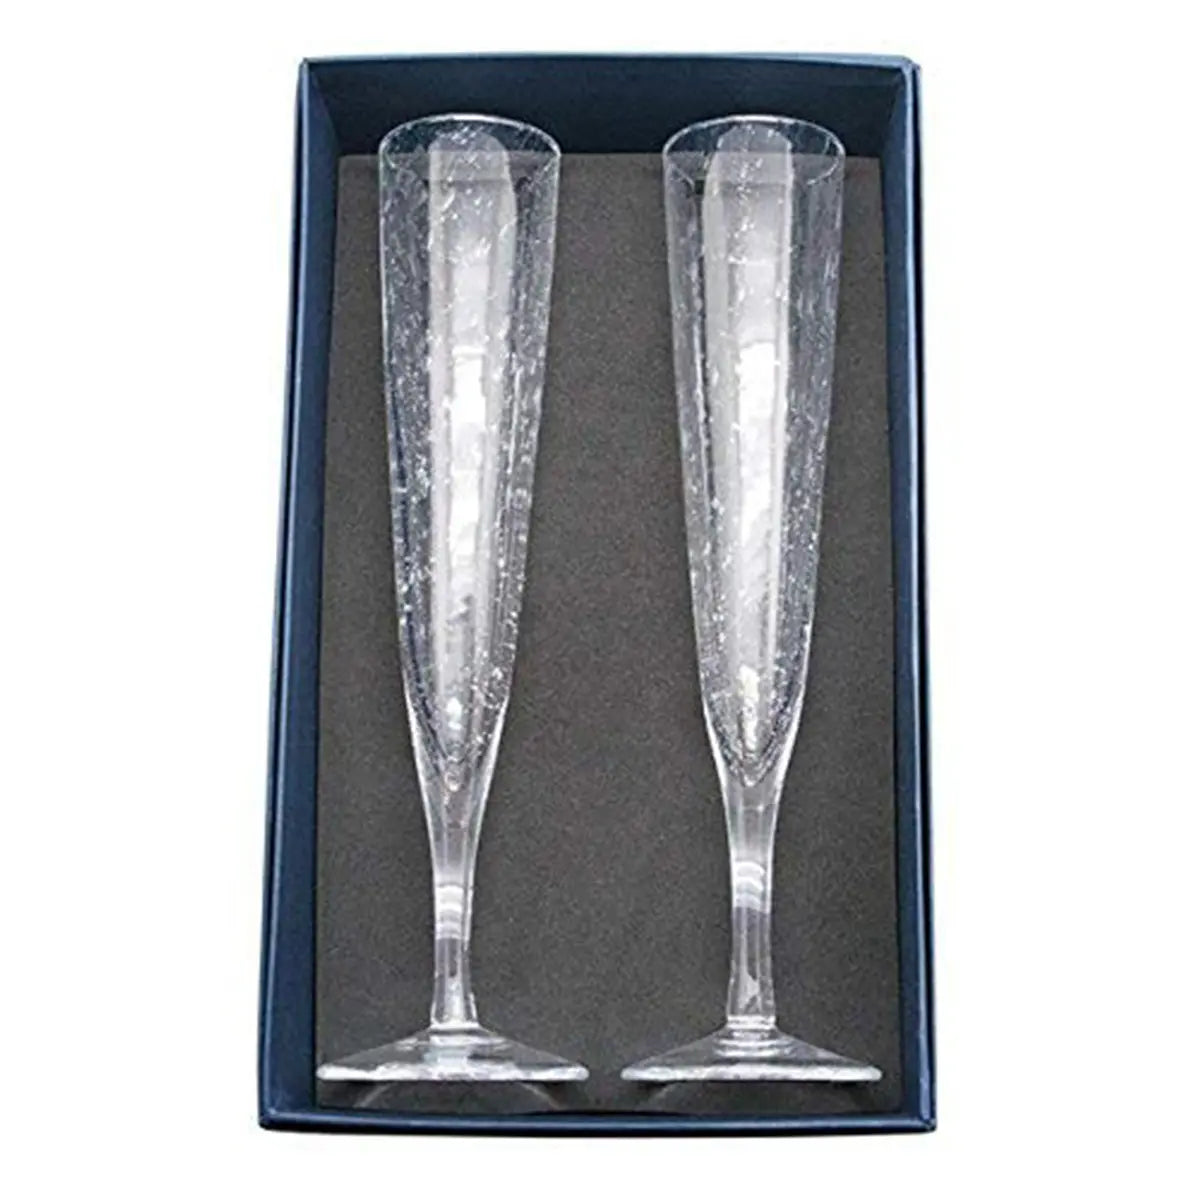 A pair of Mariposa Bellini Champagne Flute within the giftbox